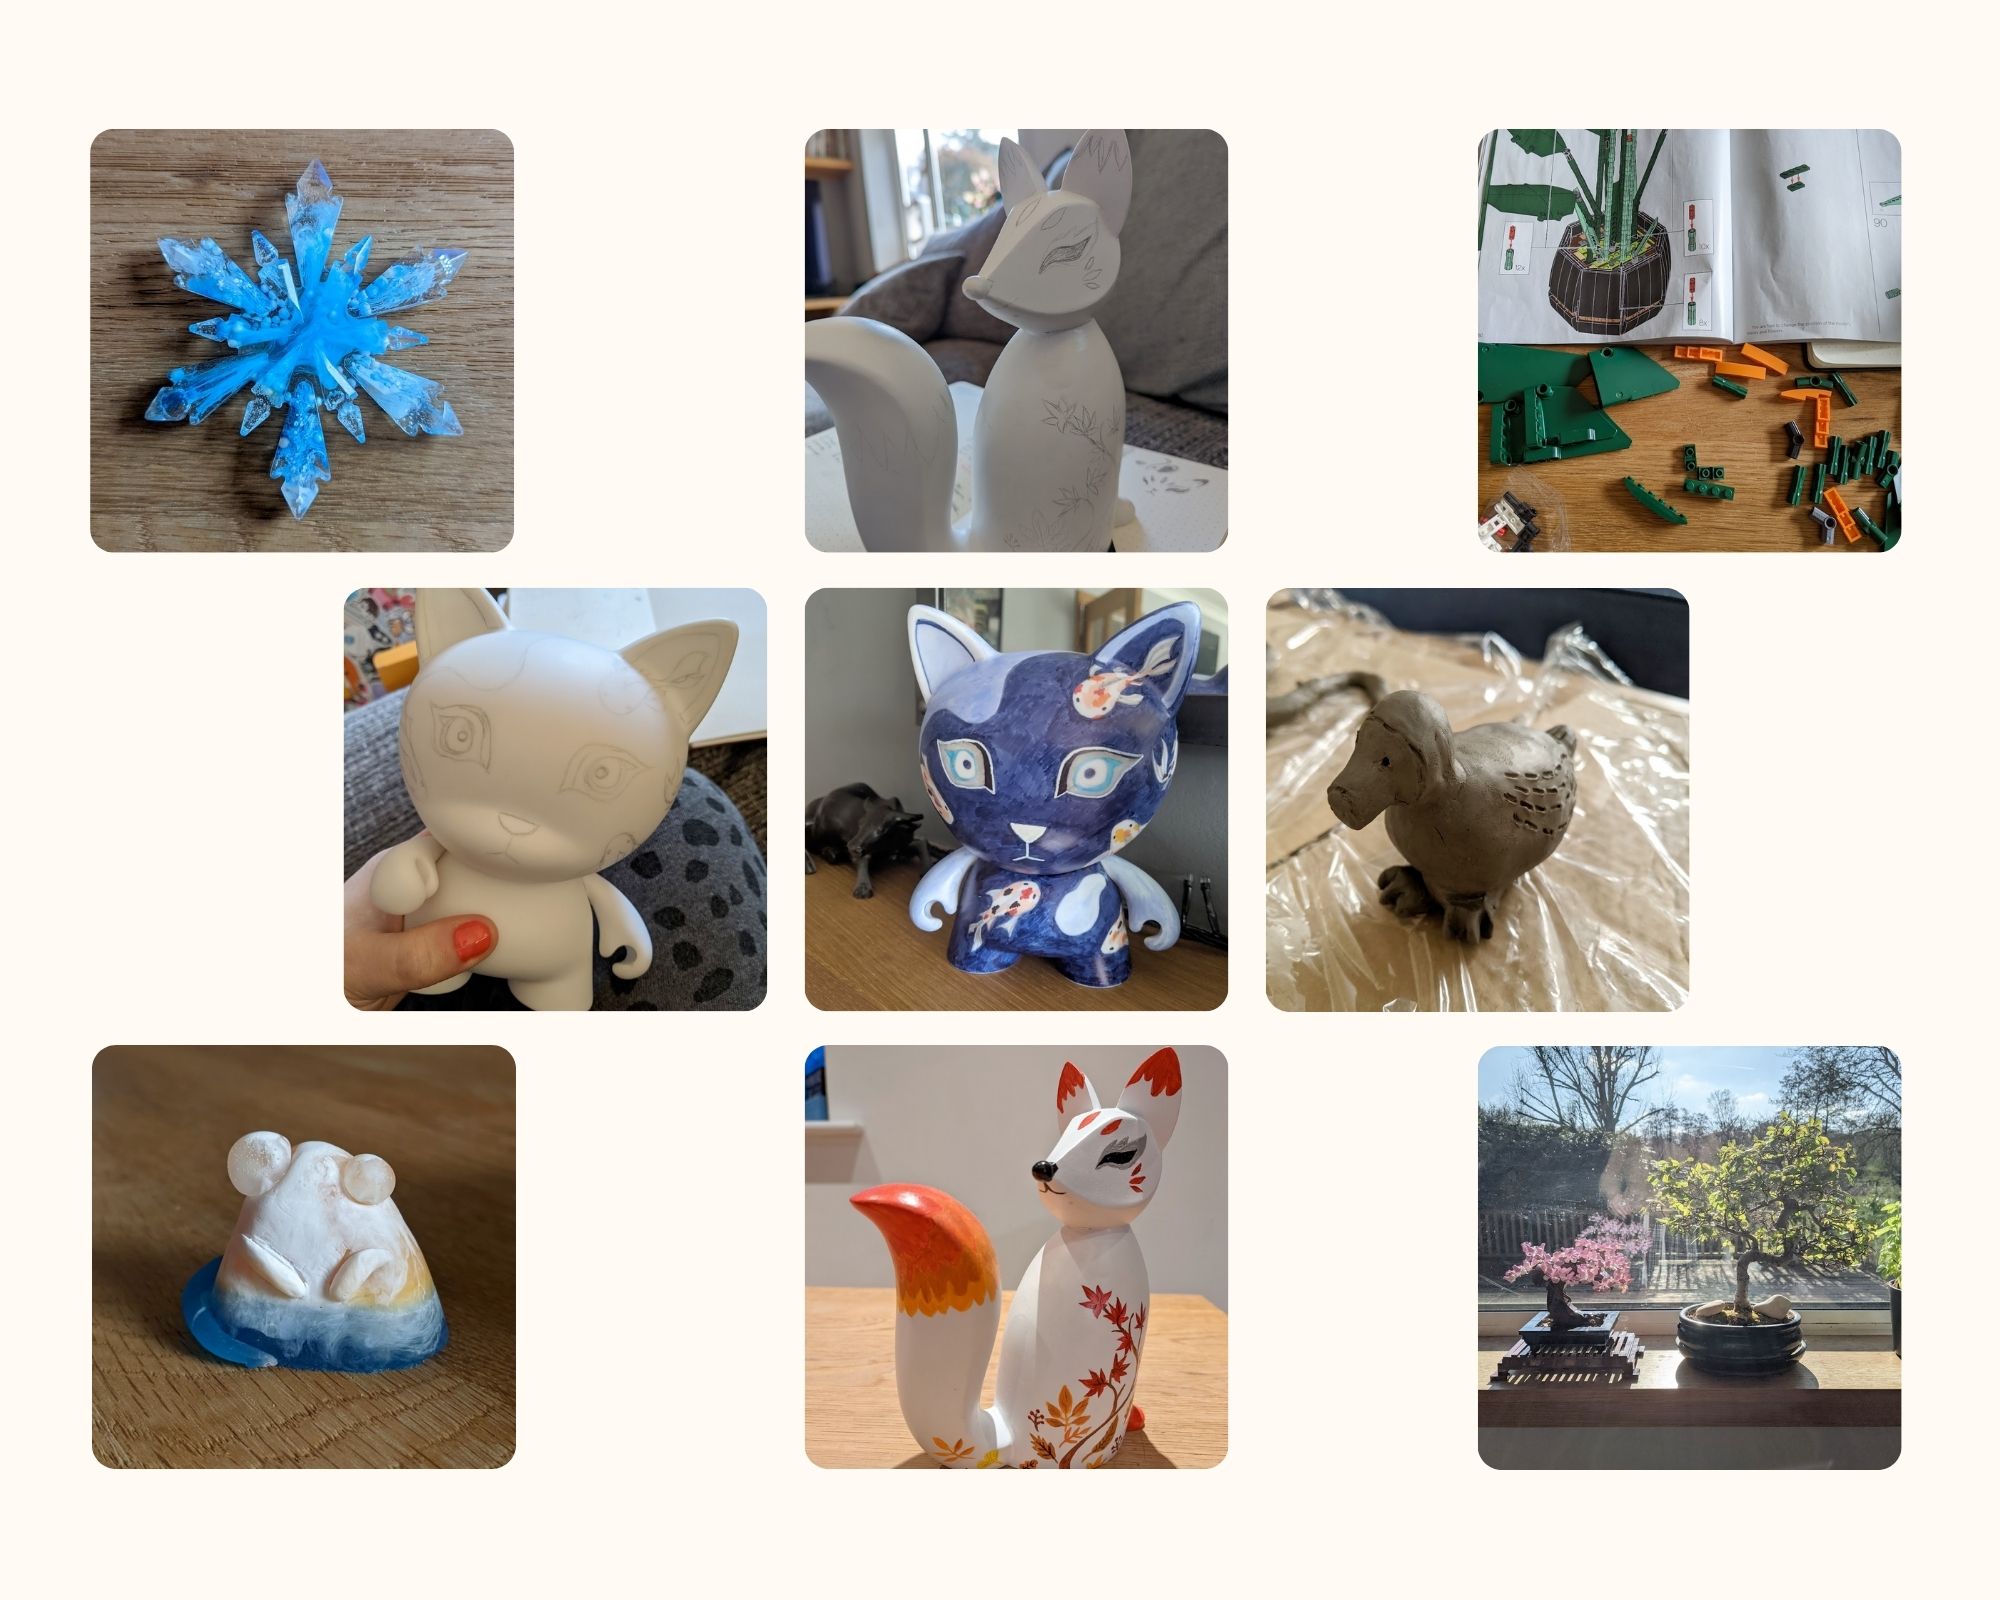 A set of images featuring resin figures, a snowflake, Lego botanicals sets, painted figures, and more.